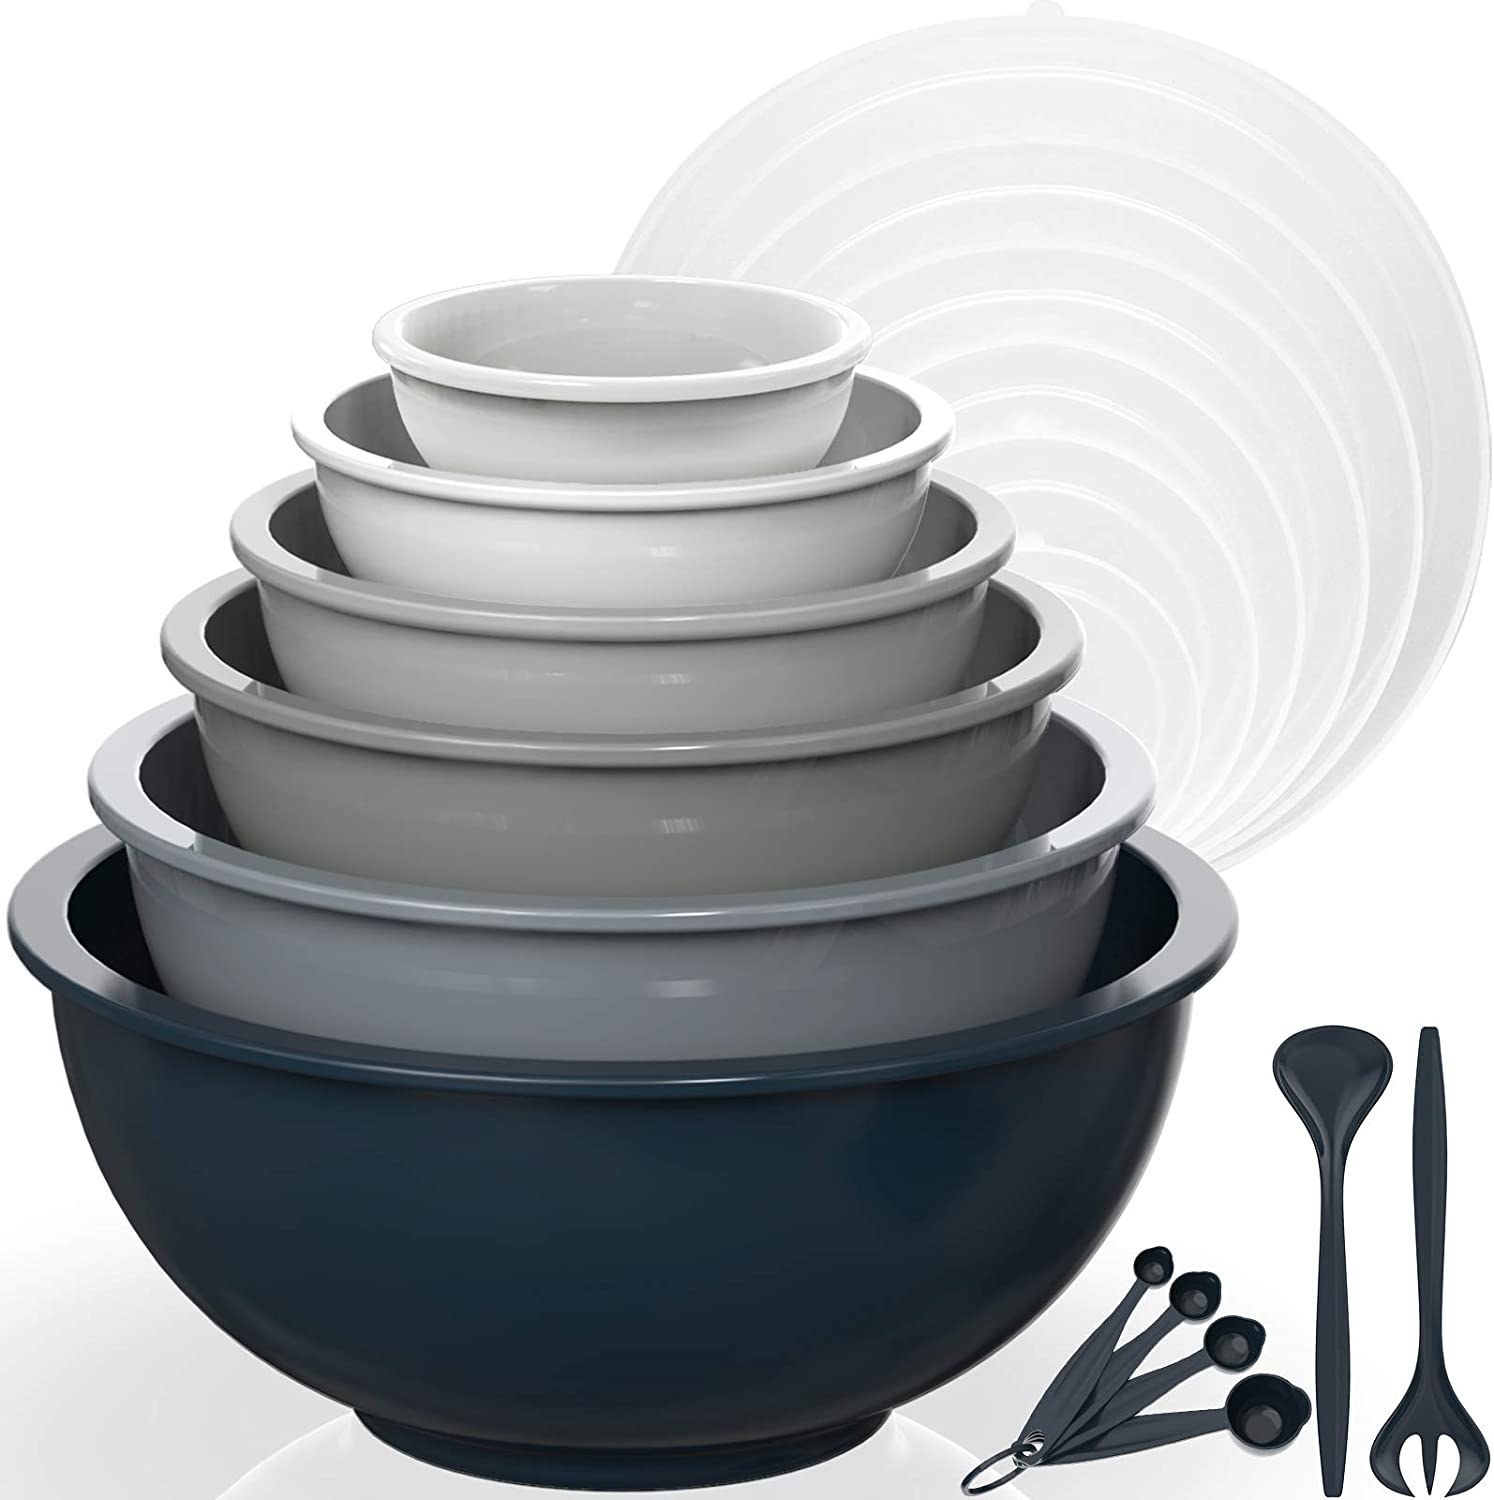 the bowls, their lids, and the utensils